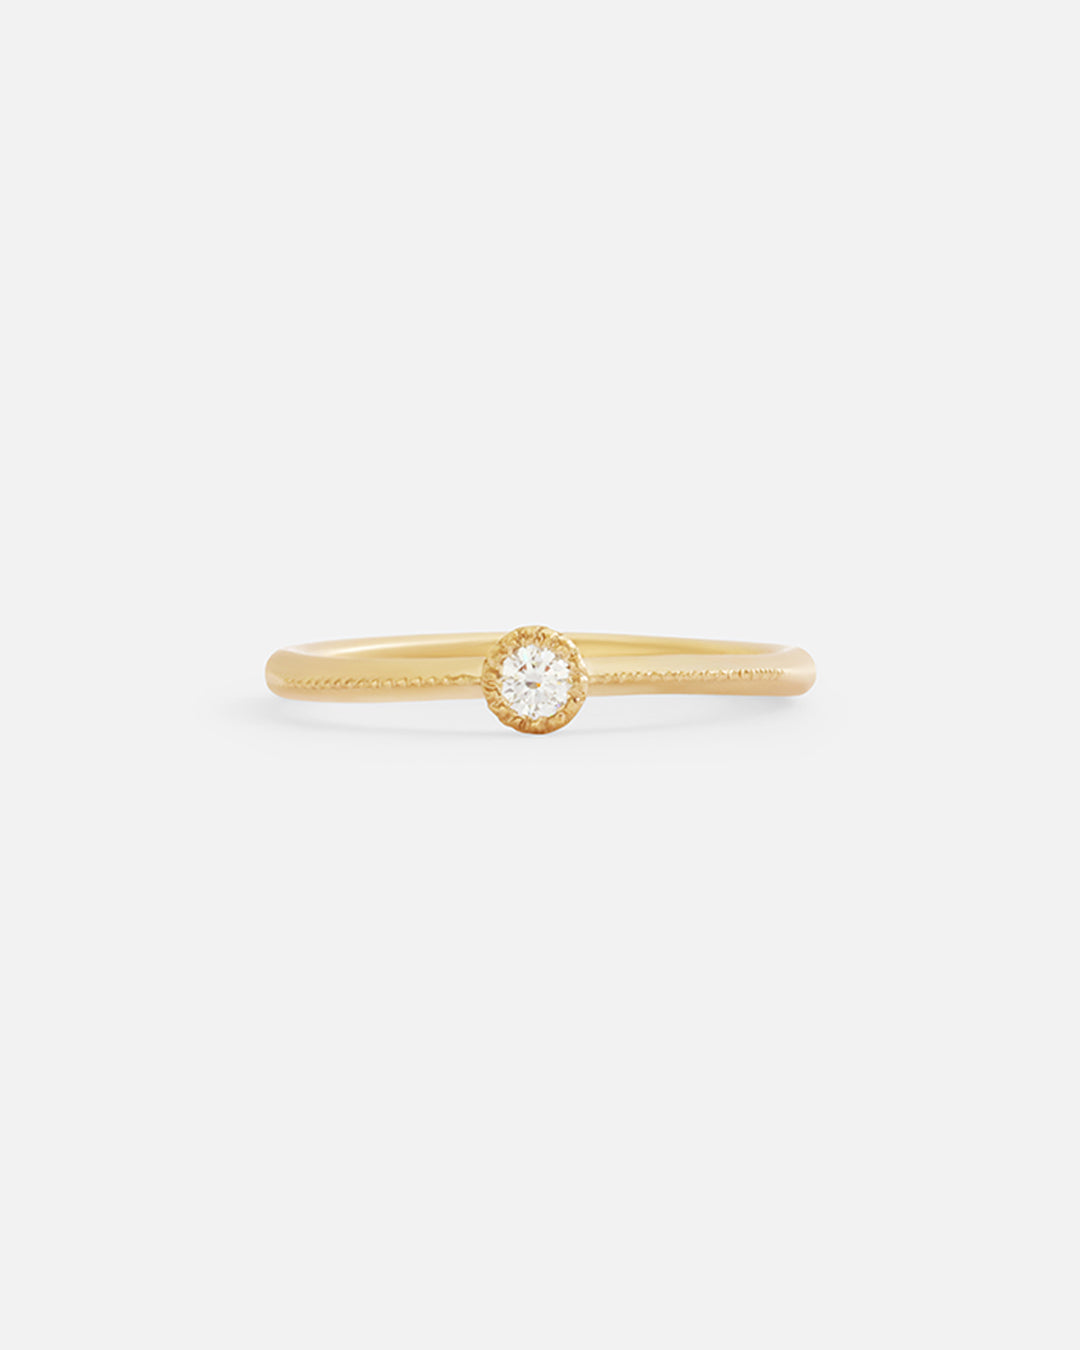 Melee Ball / White Diamond Ring Ready To Ship 14k Yellow Gold with Sandblasted Finish 5.25 By Hiroyo in rings Category